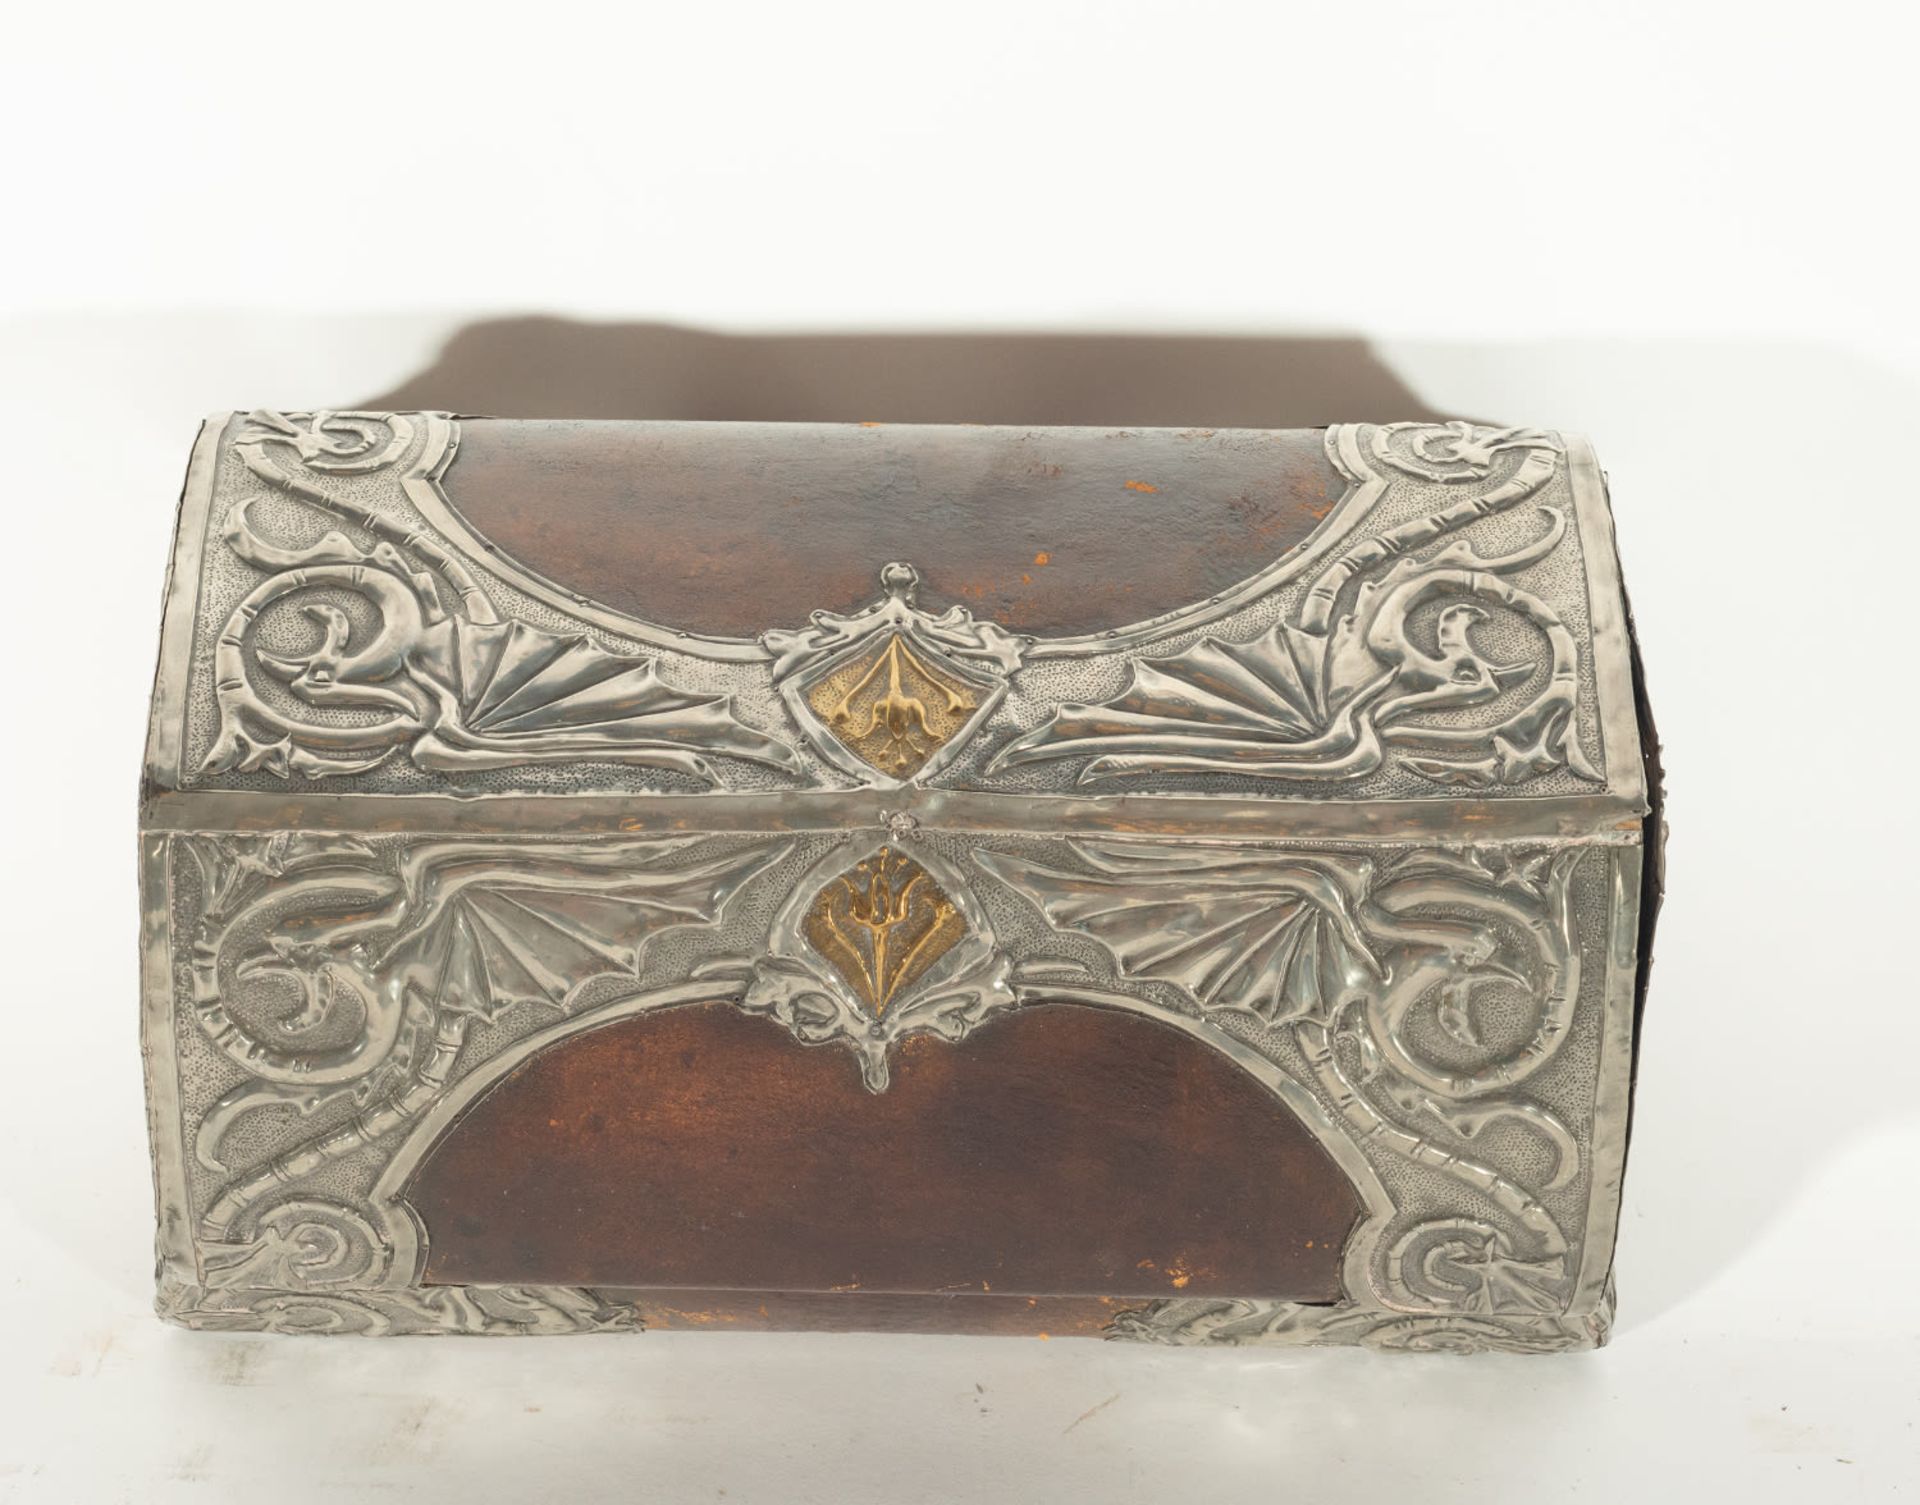 Catalan modernist chest in leather and silver appliques, Barcelona, - Image 5 of 5